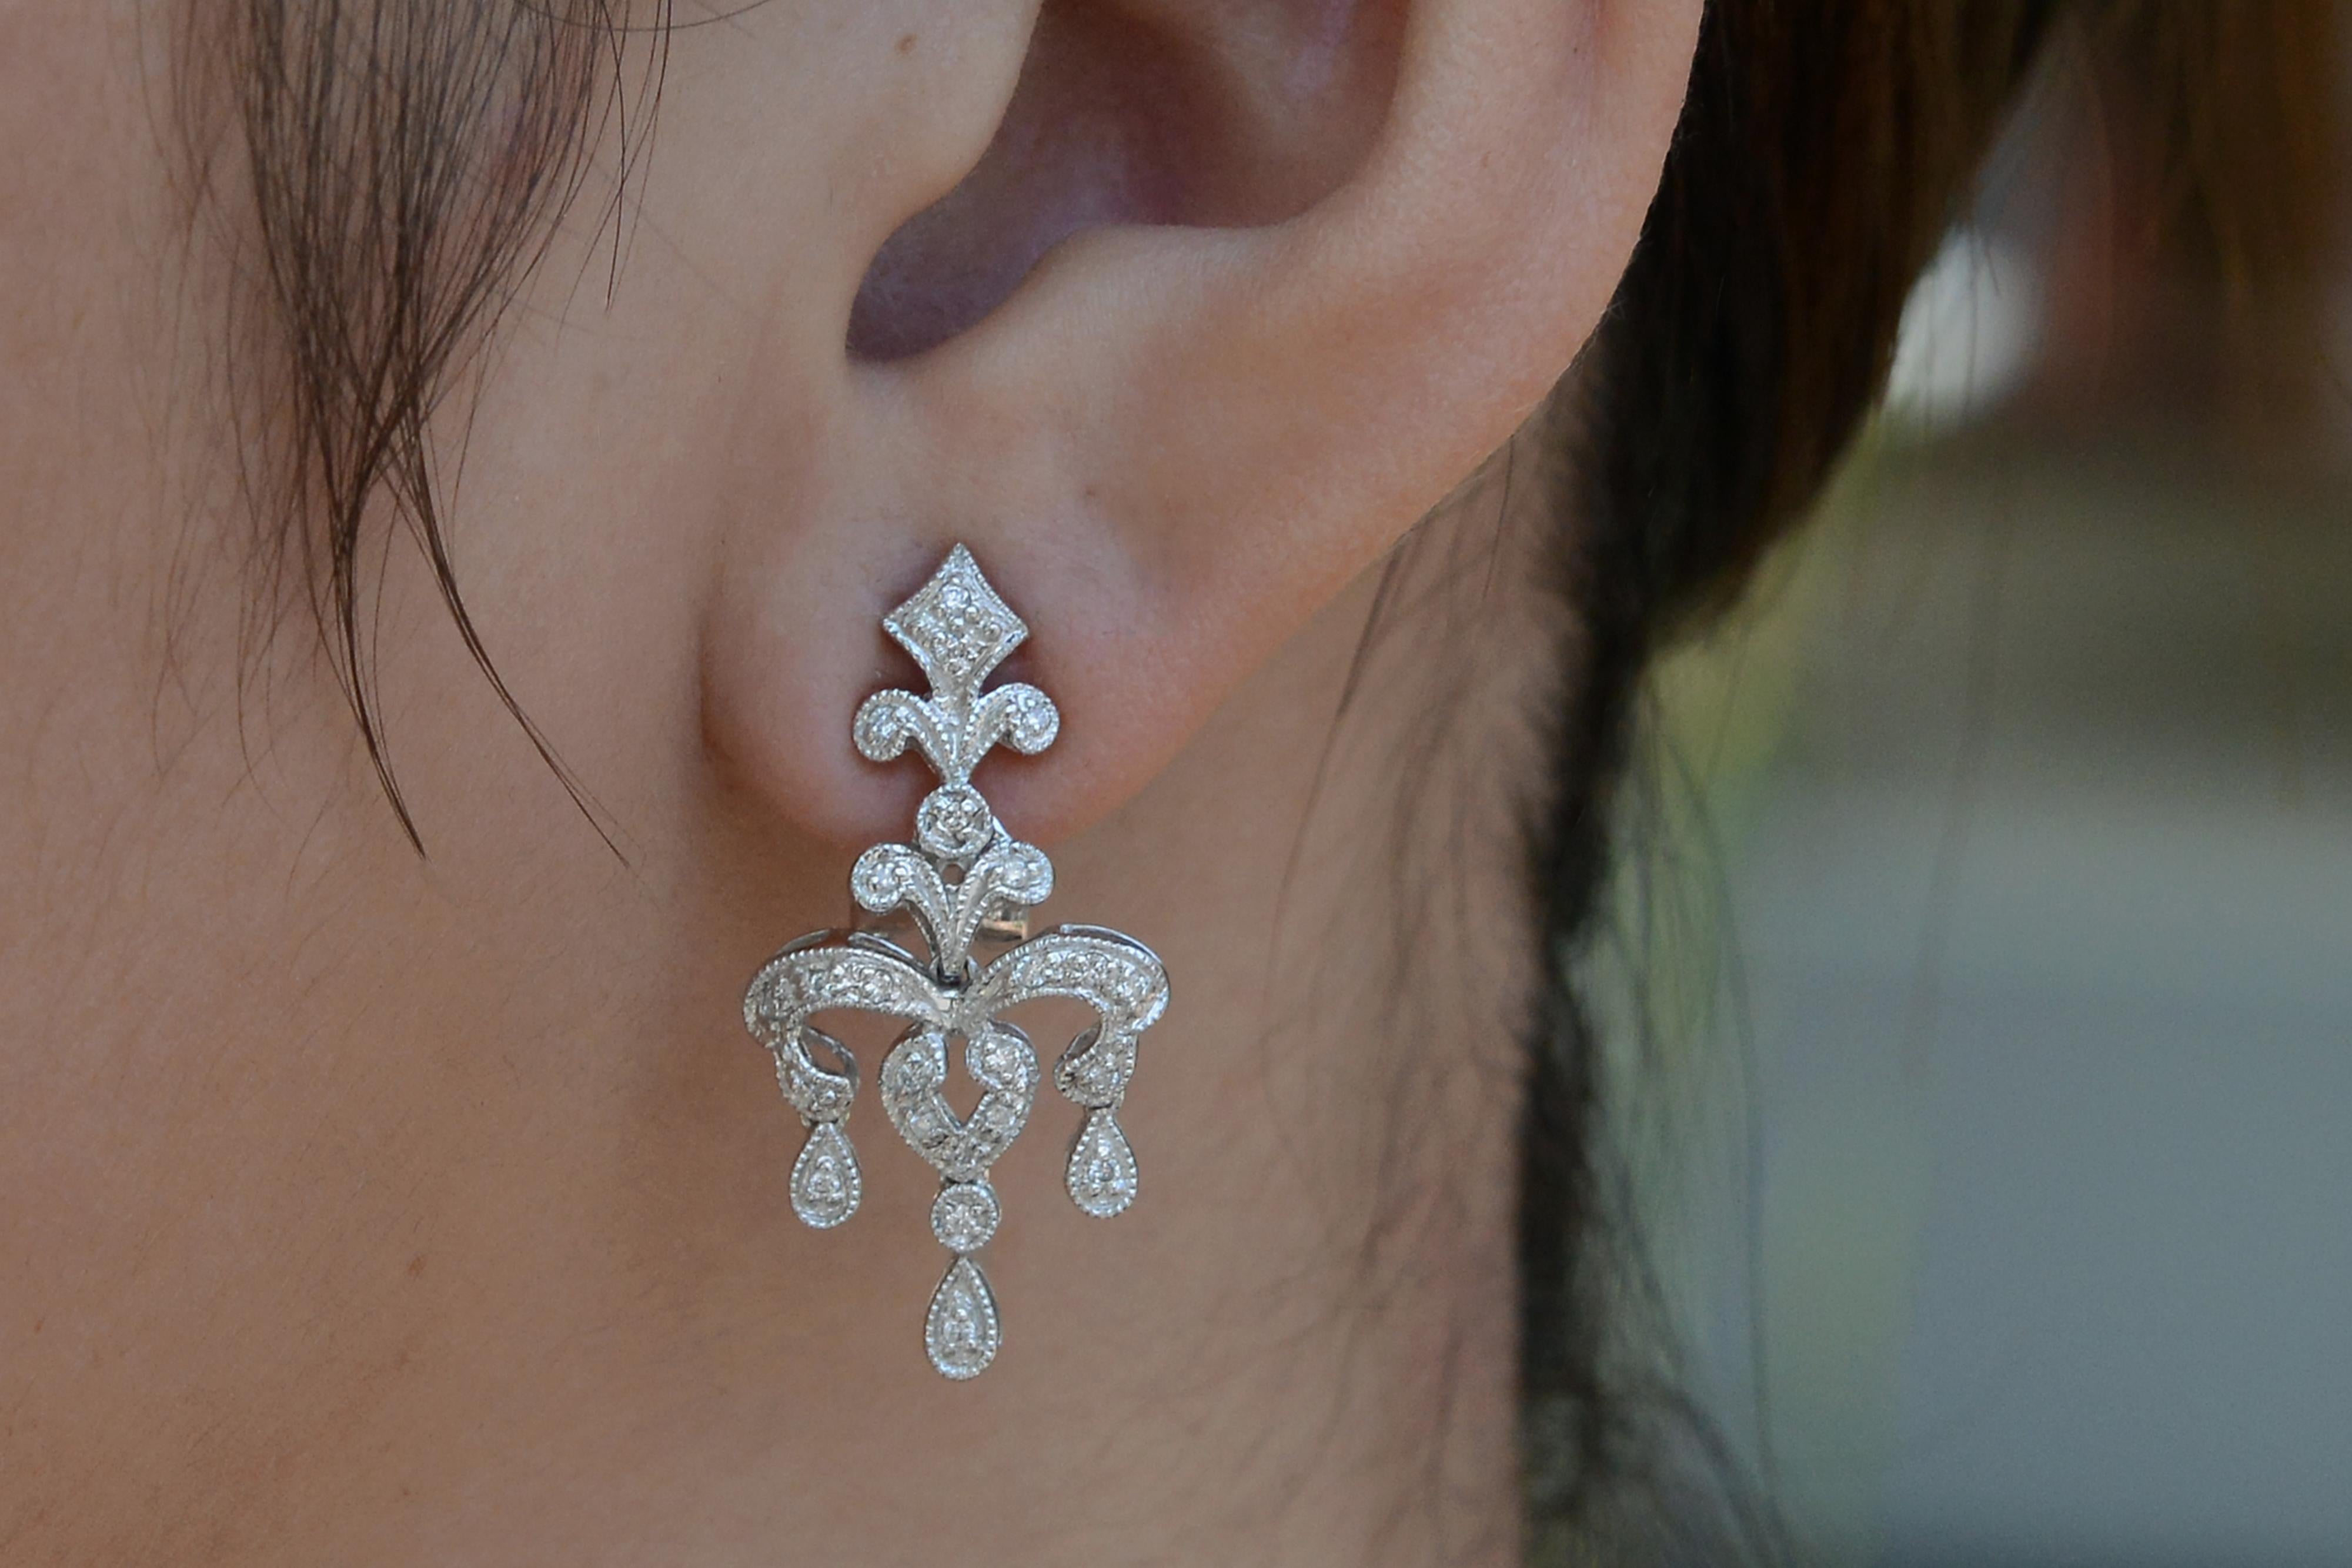 An affordable and luxurious estate find, these timeless dangle earrings are crafted with precision of 18k white gold. The milgrain adorned pavé setting of 48 round brilliant cut diamonds provides a shimmering light that sway with an elegant